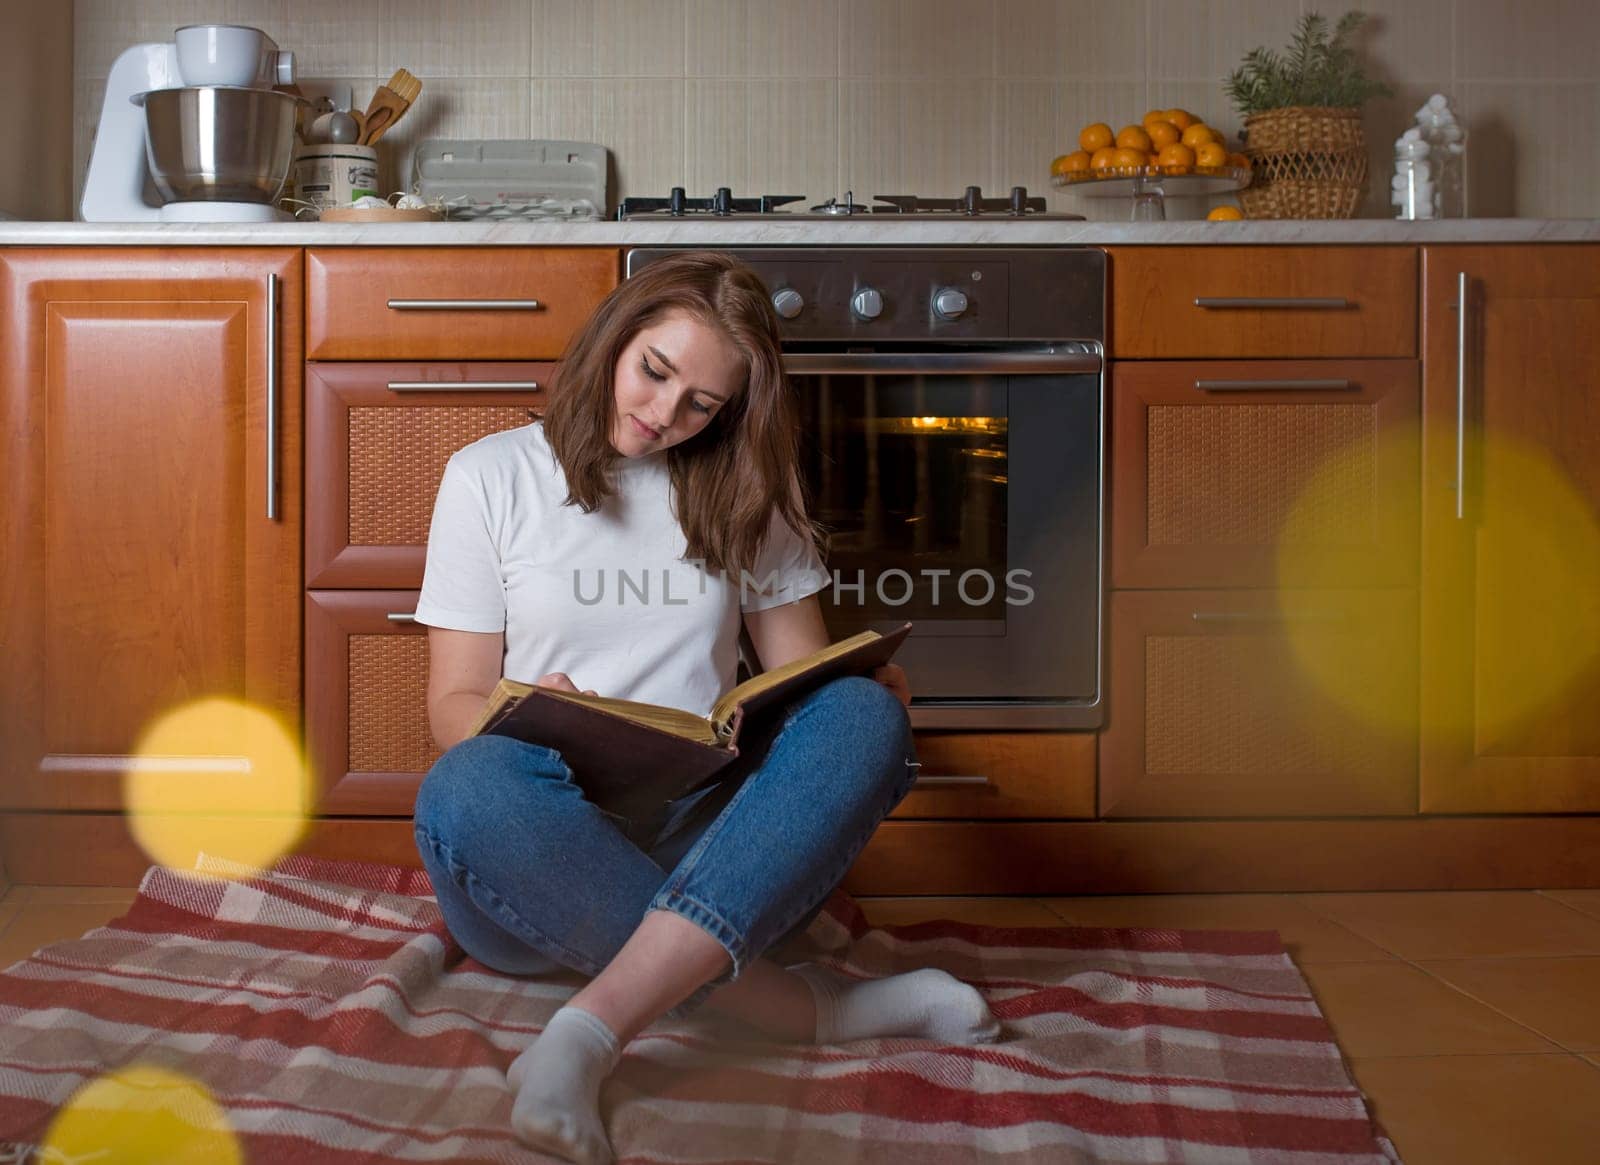 pretty young woman at home in a cozy kitchen plans to cook dinner